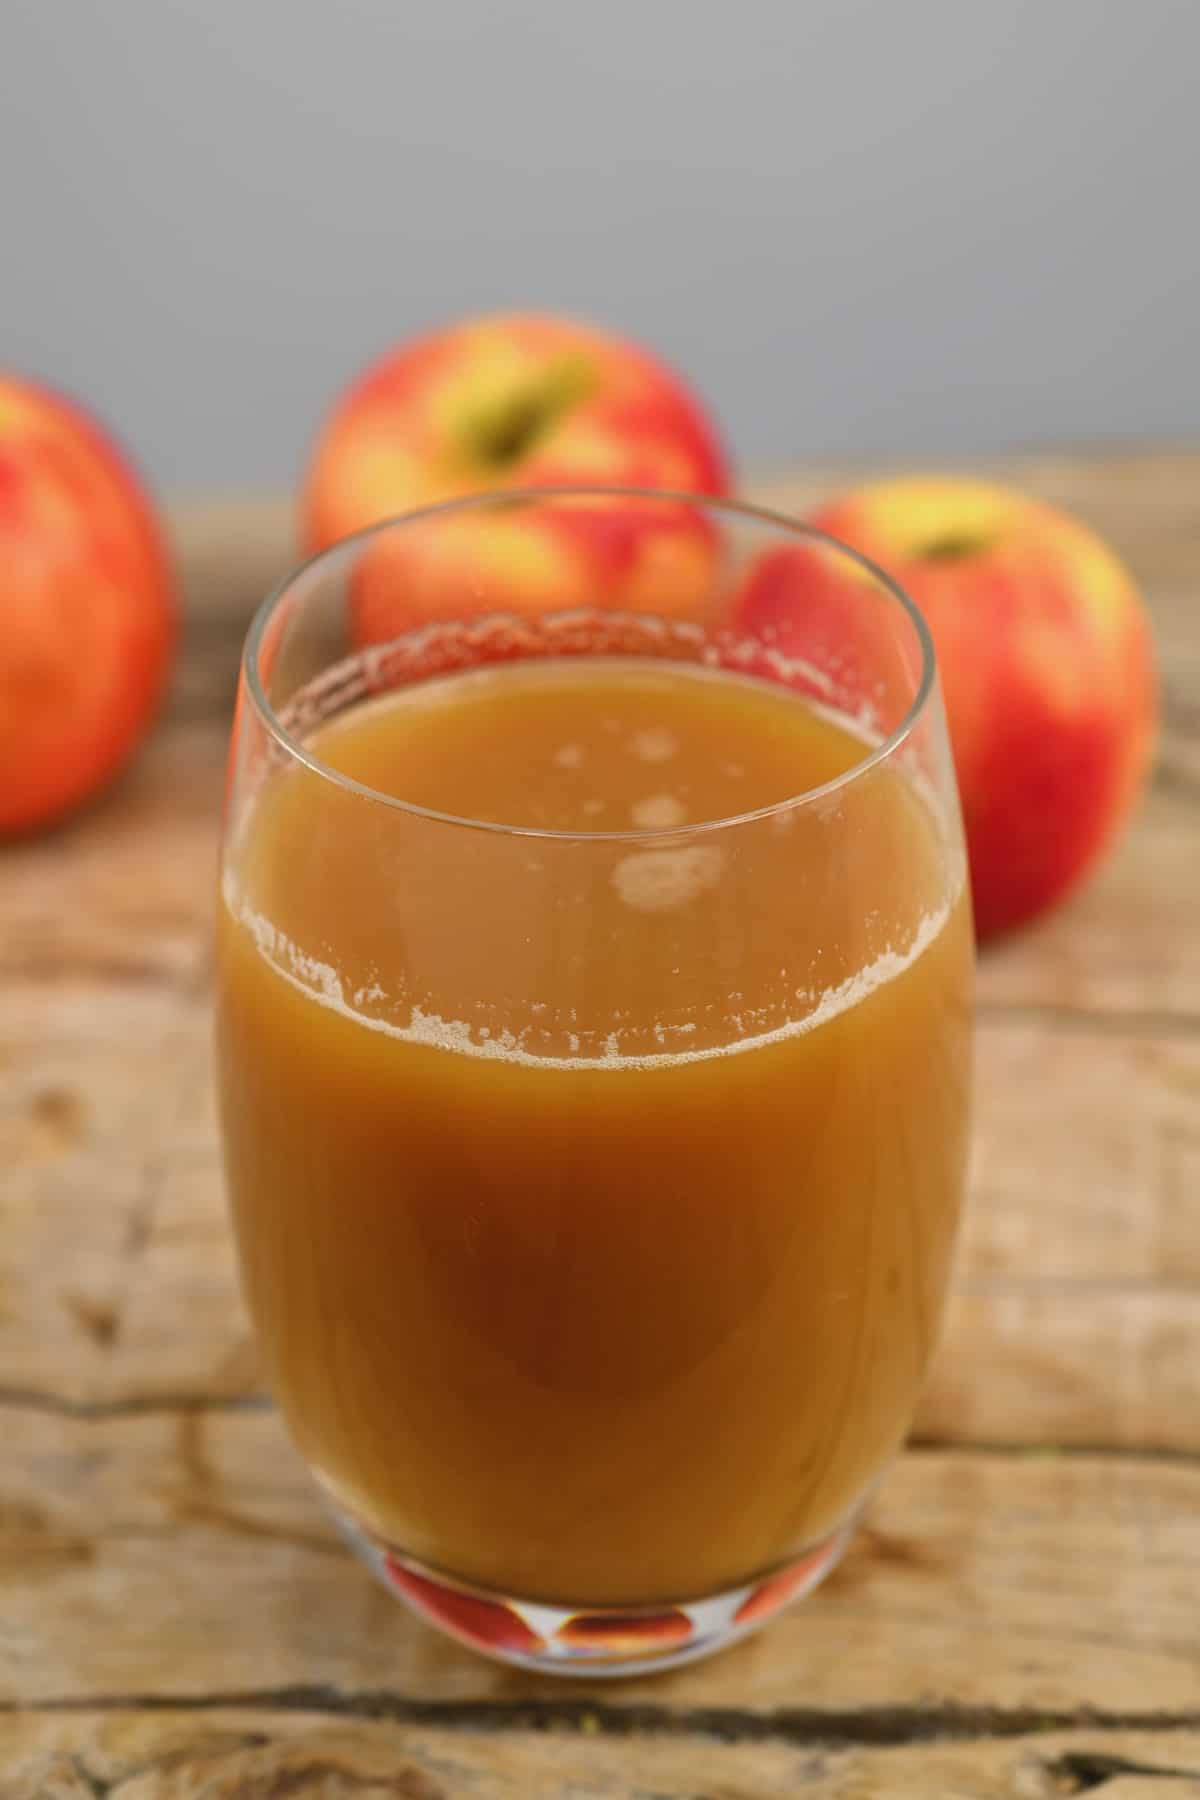 A glass with apple juice